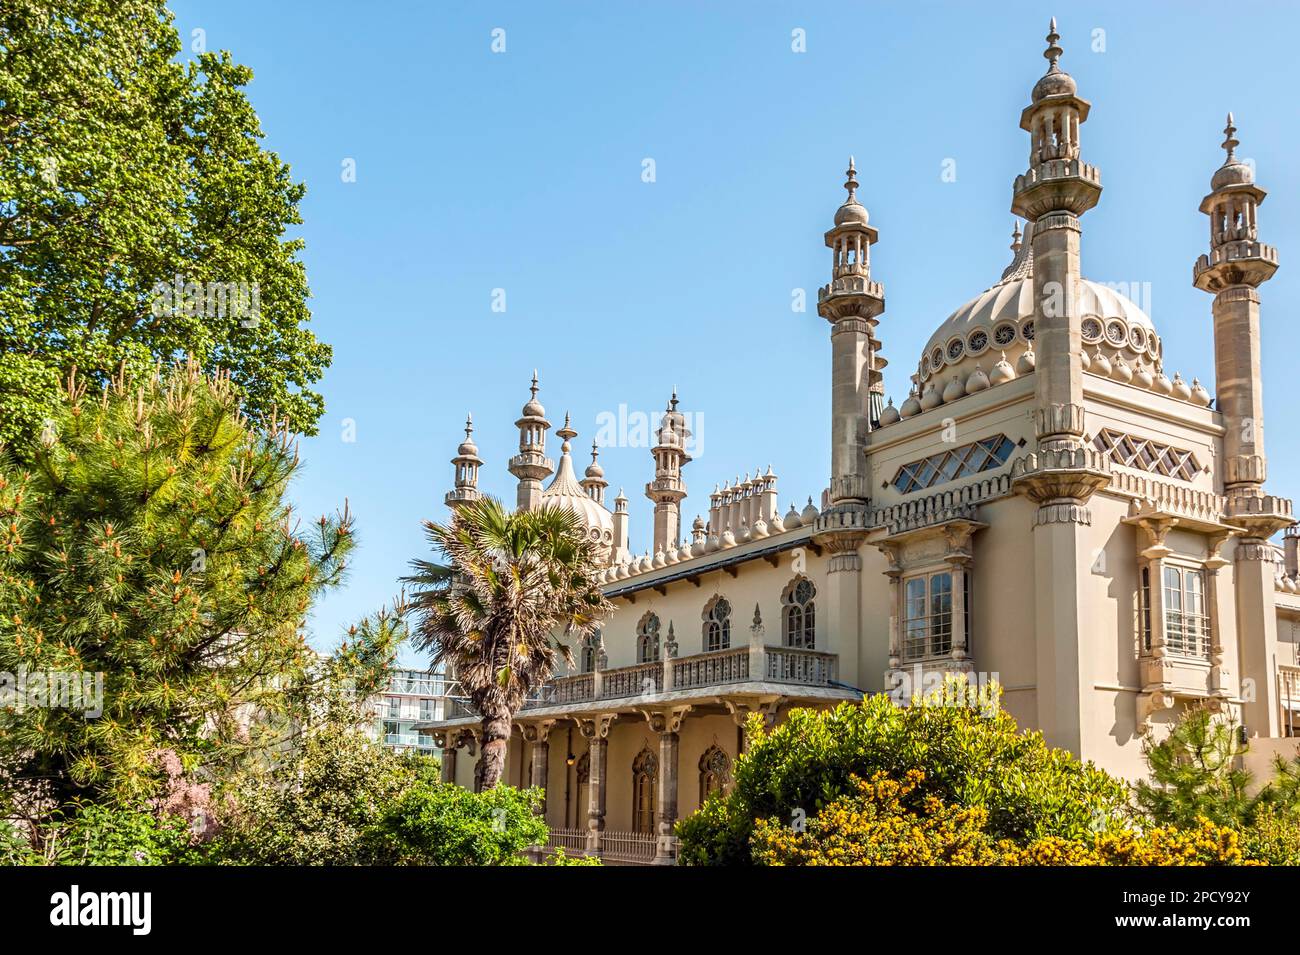 Historic Royal Pavilion of Brighton in East Sussex, England Stock Photo